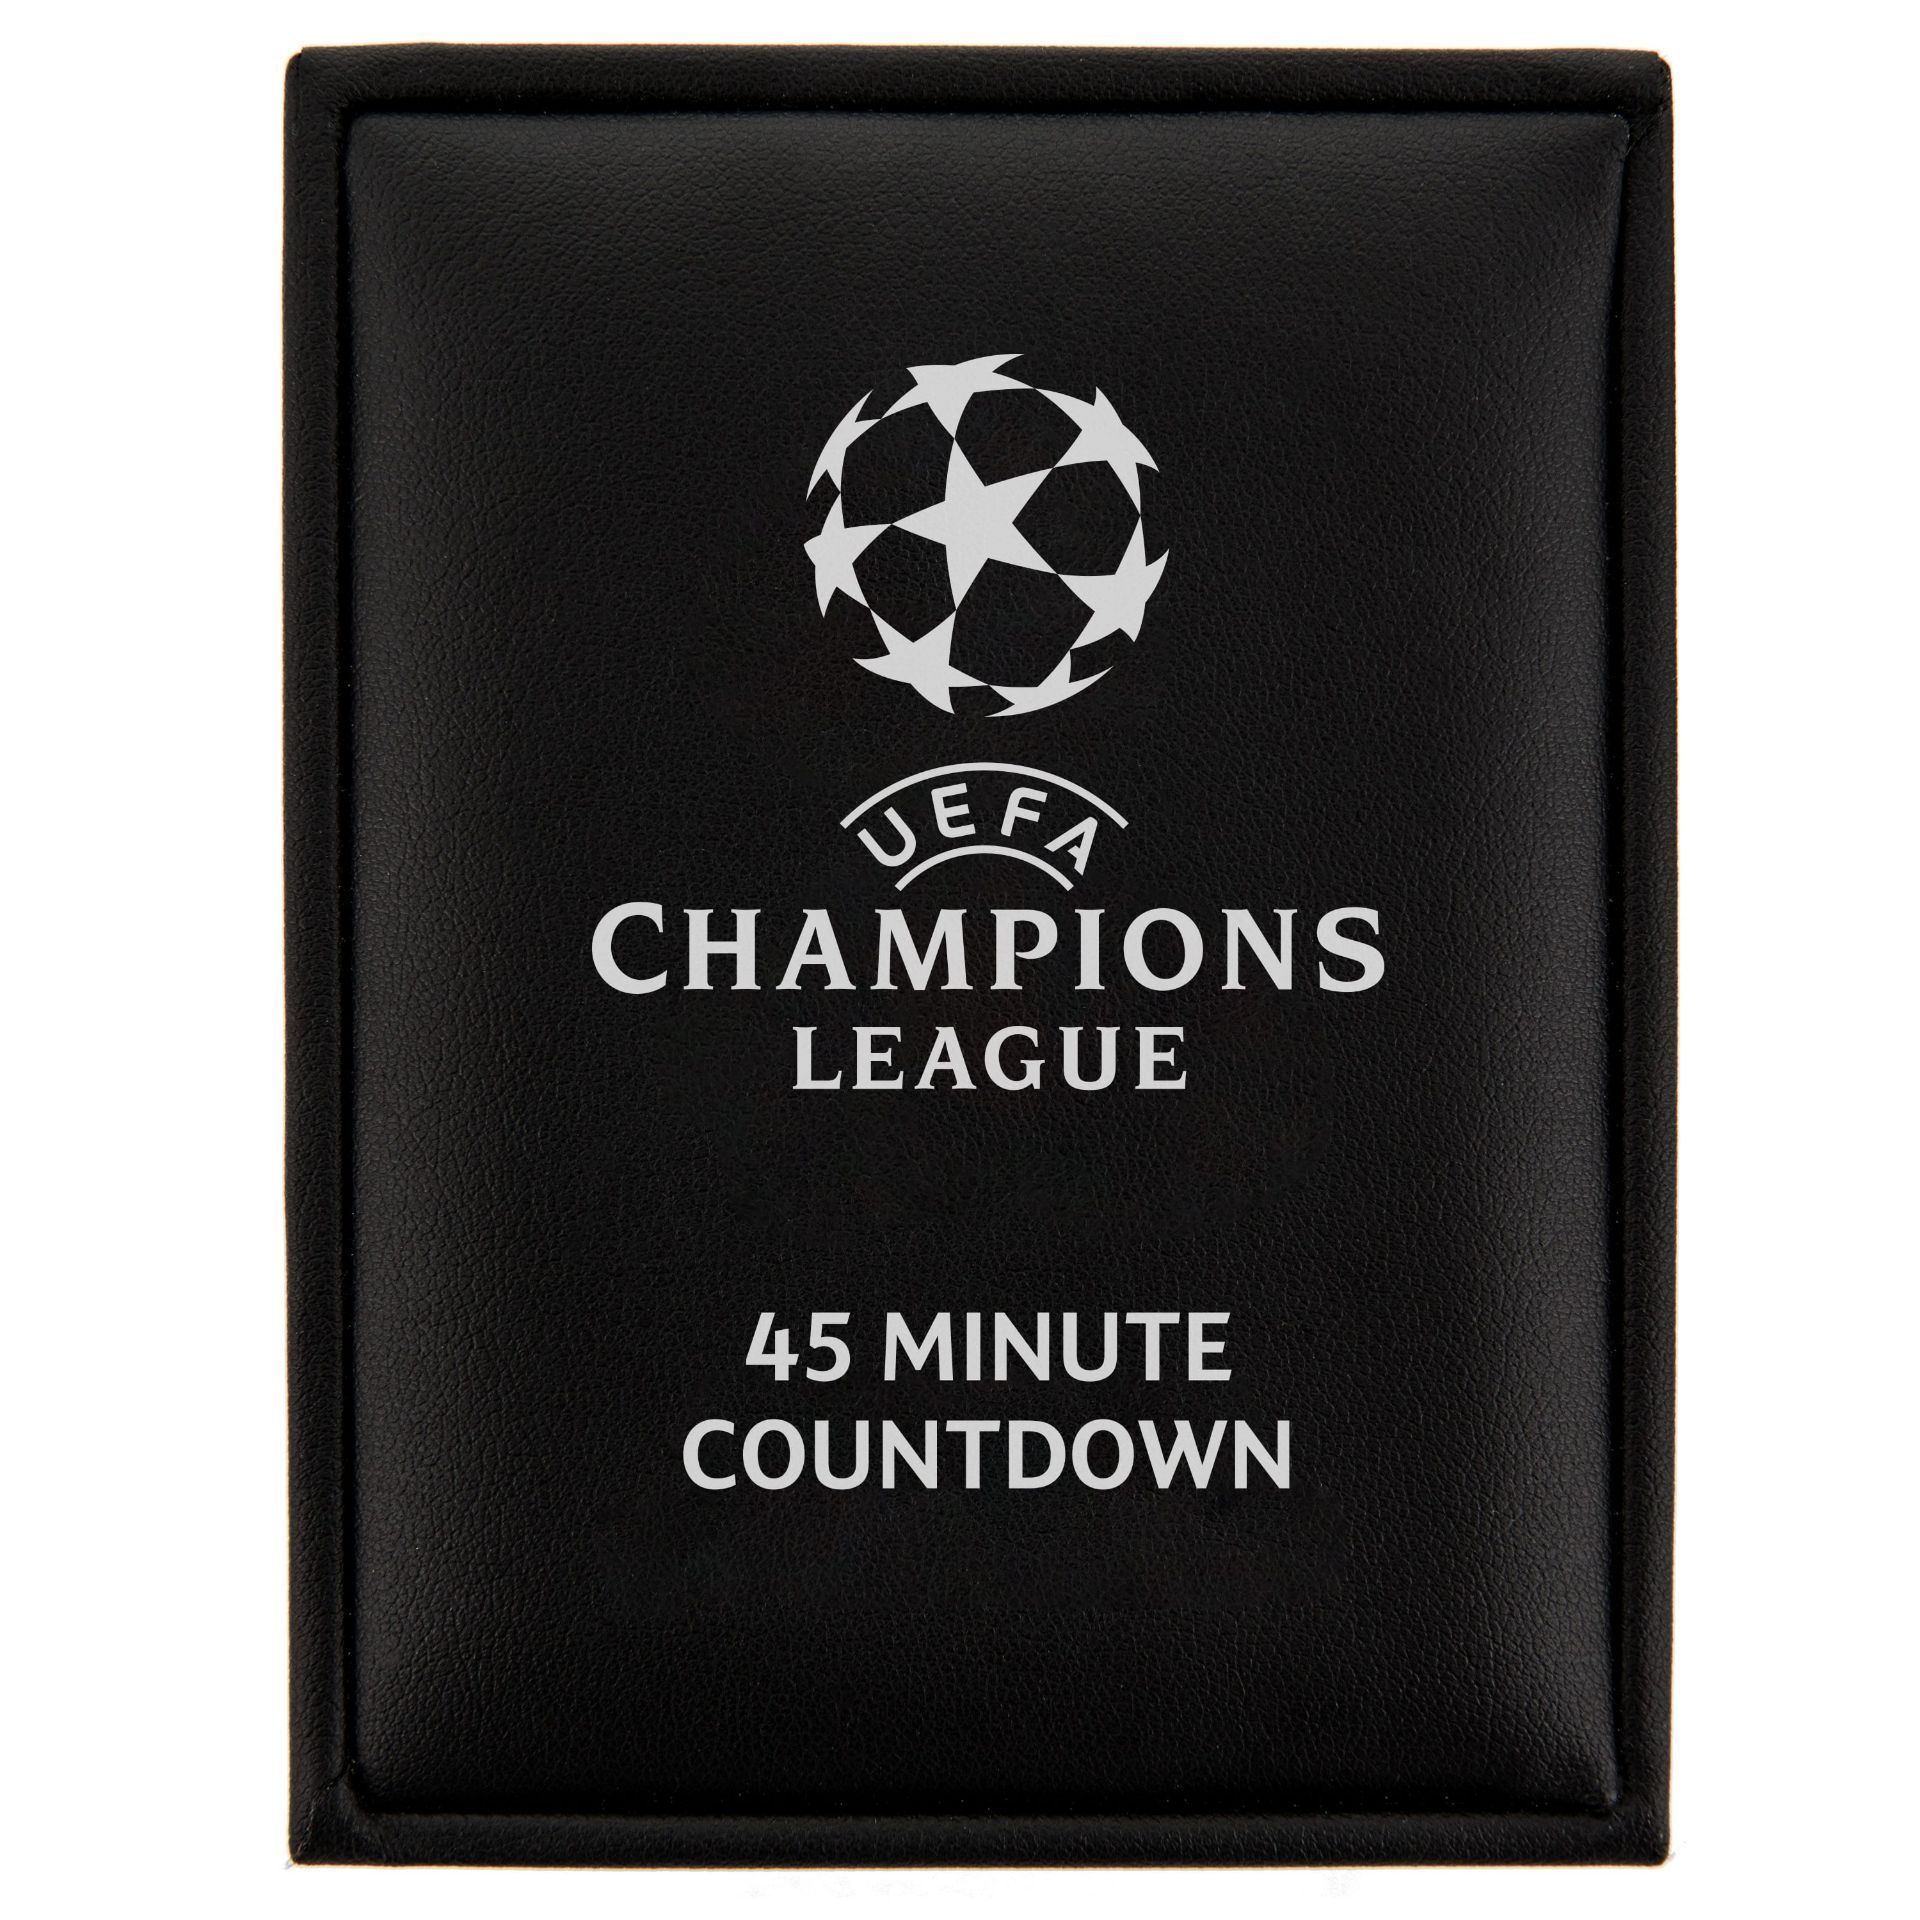 BULK LOT OF 20 x BRAND NEW OFFICIAL UEFA CHAMPIONS LEAGUE 45 MINUTE COUNTDOWN WATCH CL45-GLDW-BLWHP - Image 5 of 5